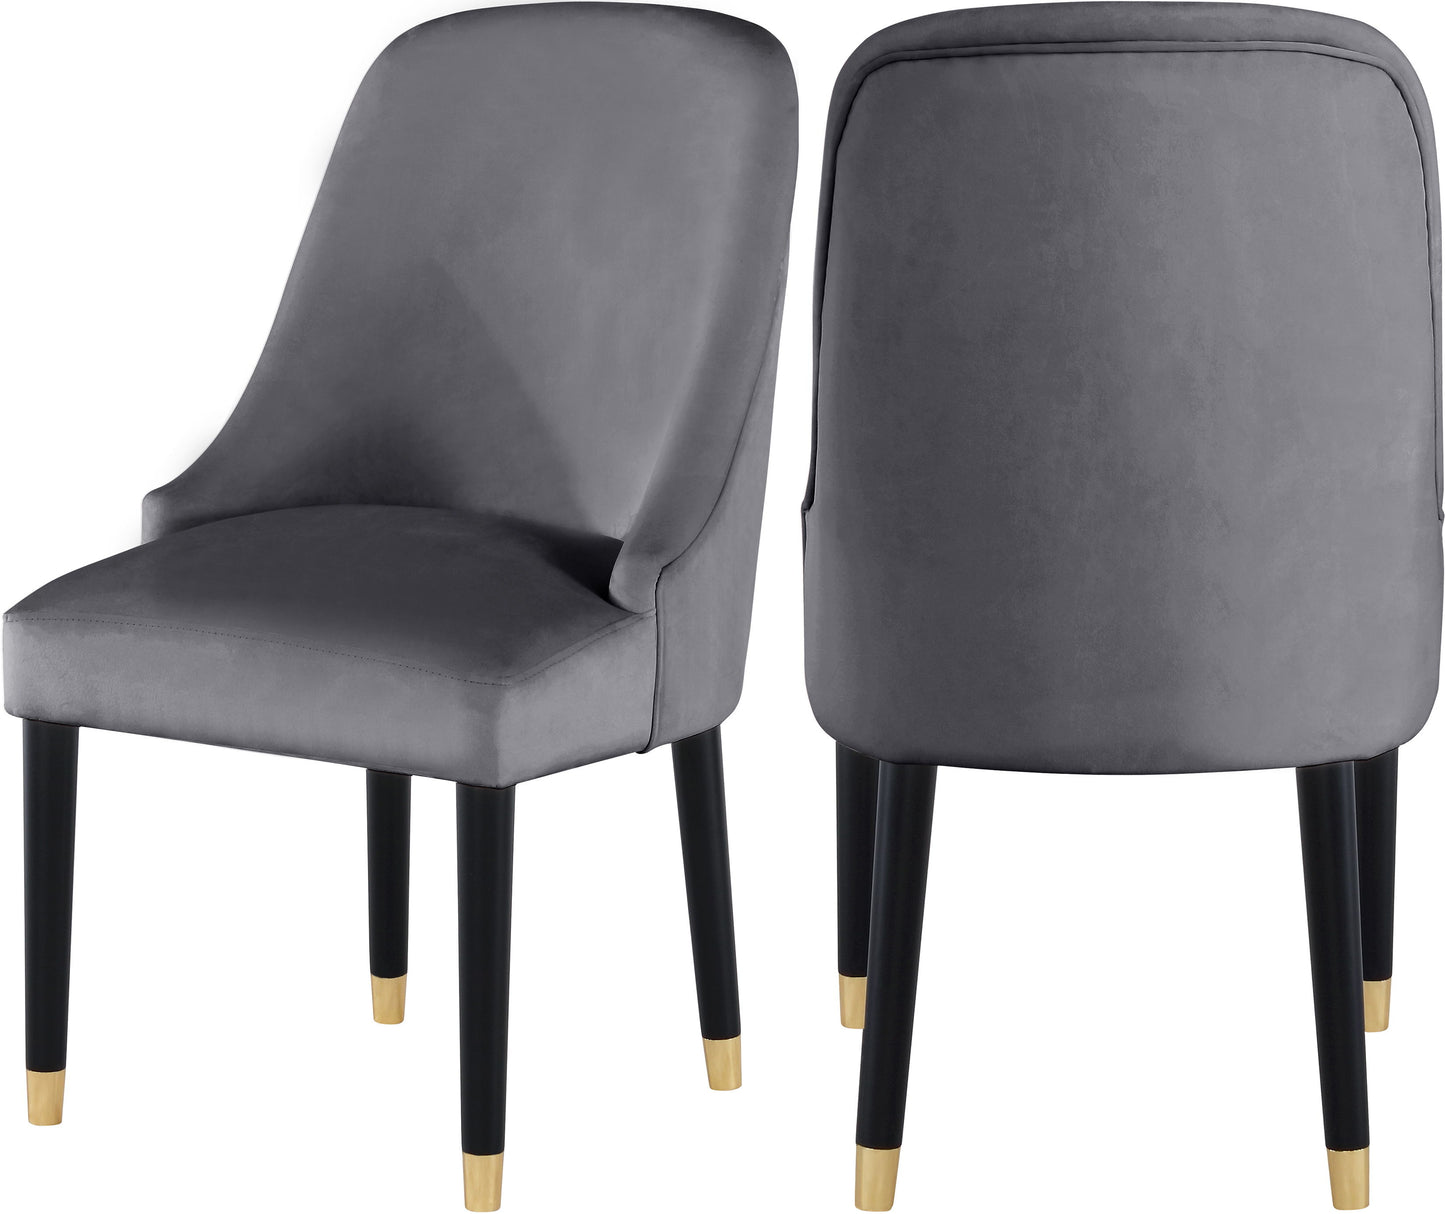 Omni - Dining Chair (Set of 2)